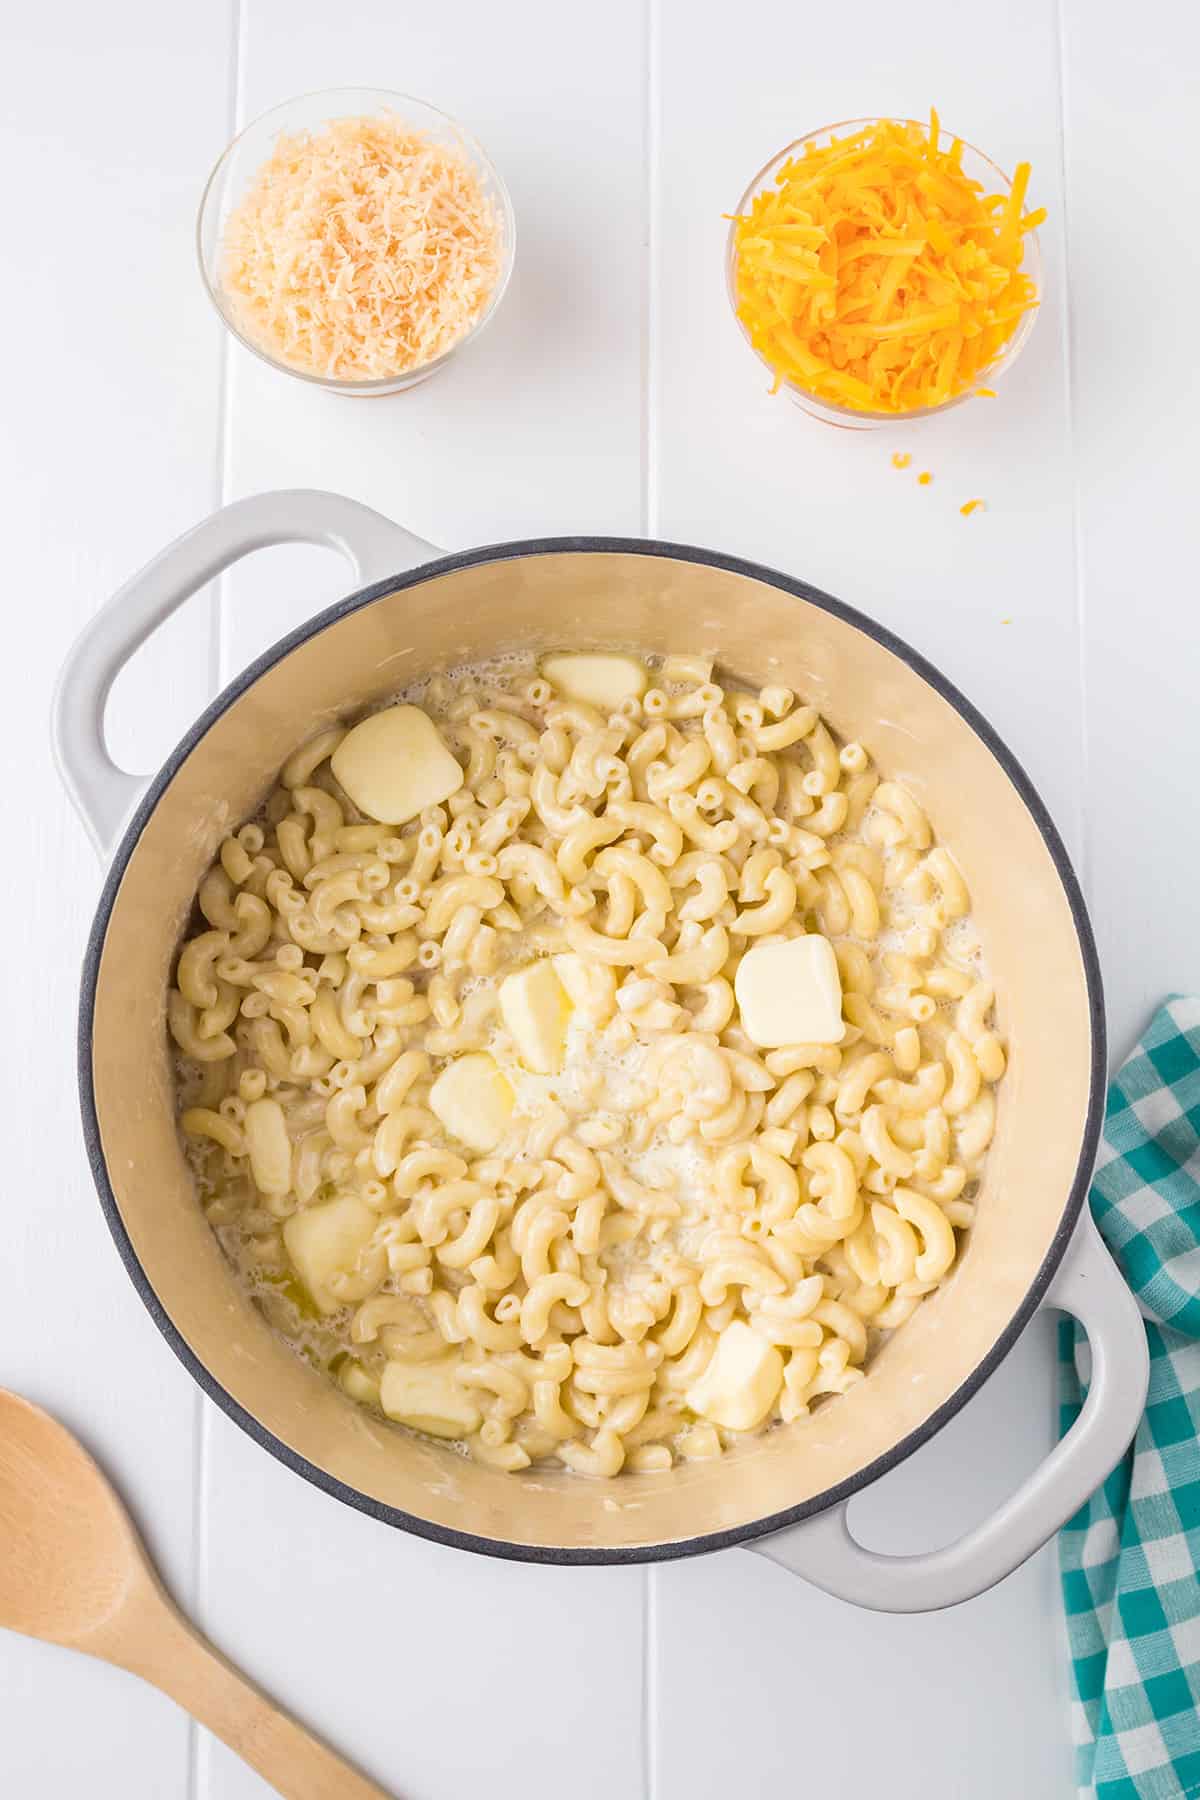 Butter added to warm cooked macaroni.